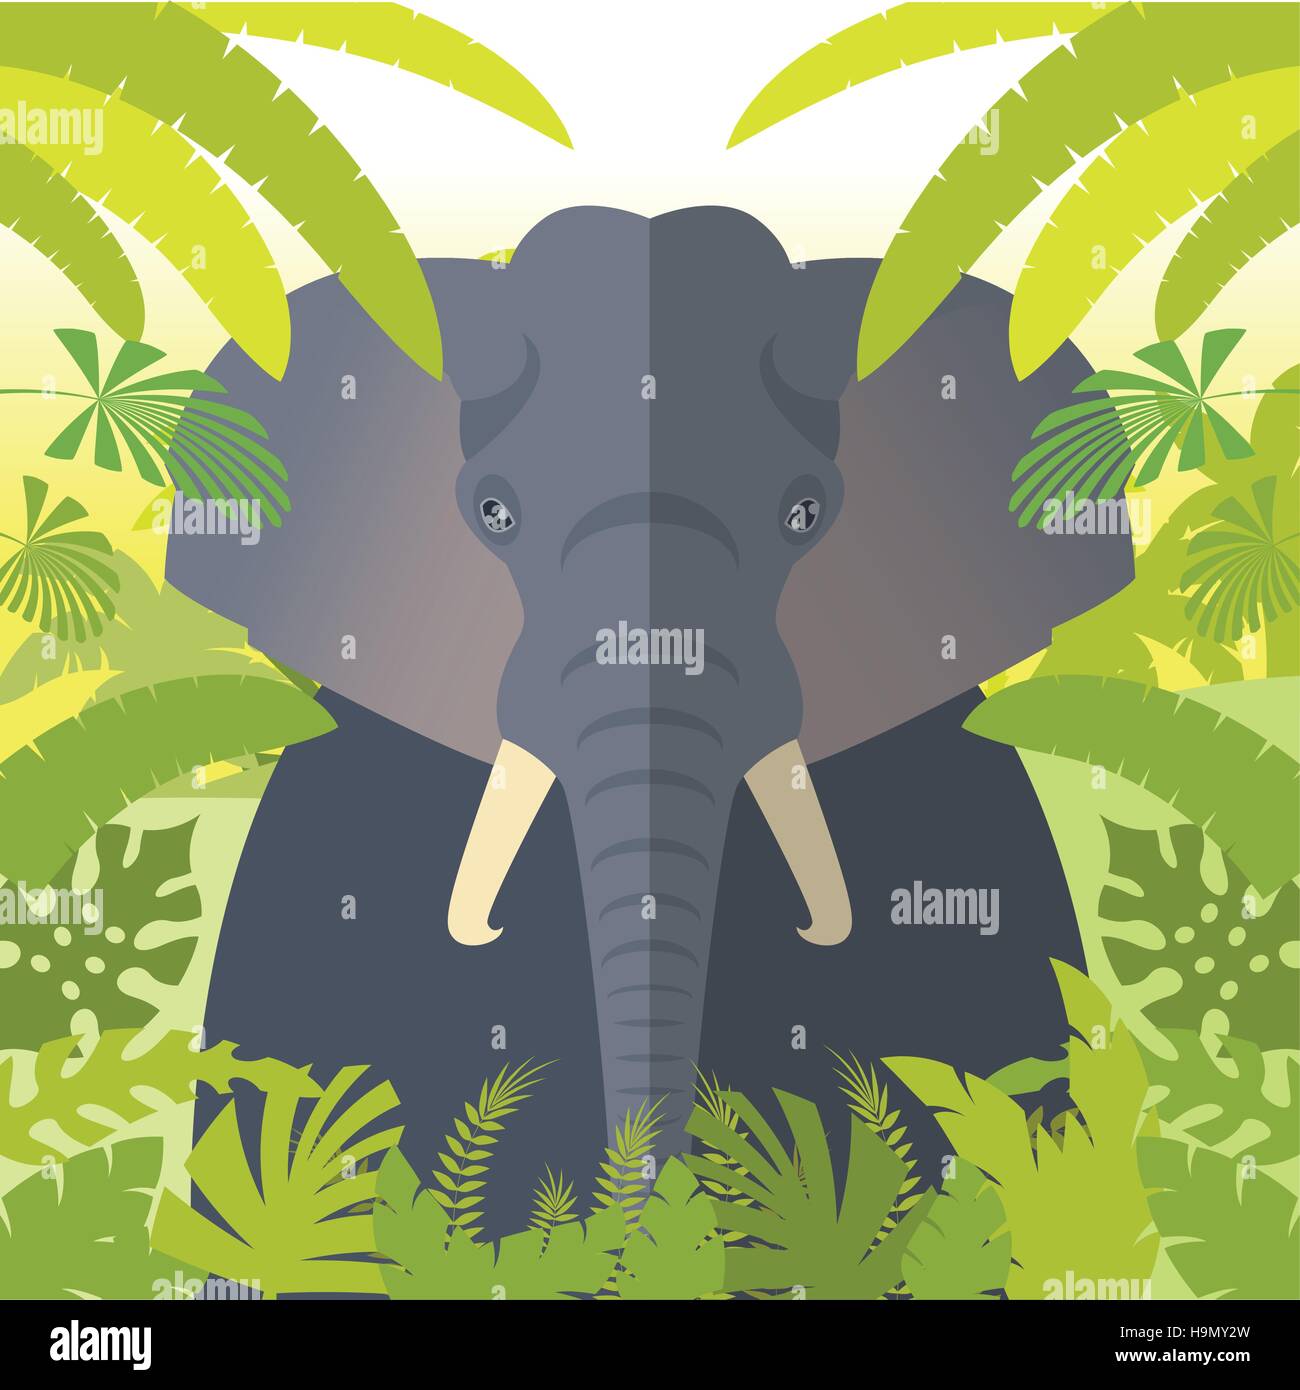 FlatVector image of the Elephant on the Jungle Background Stock Vector